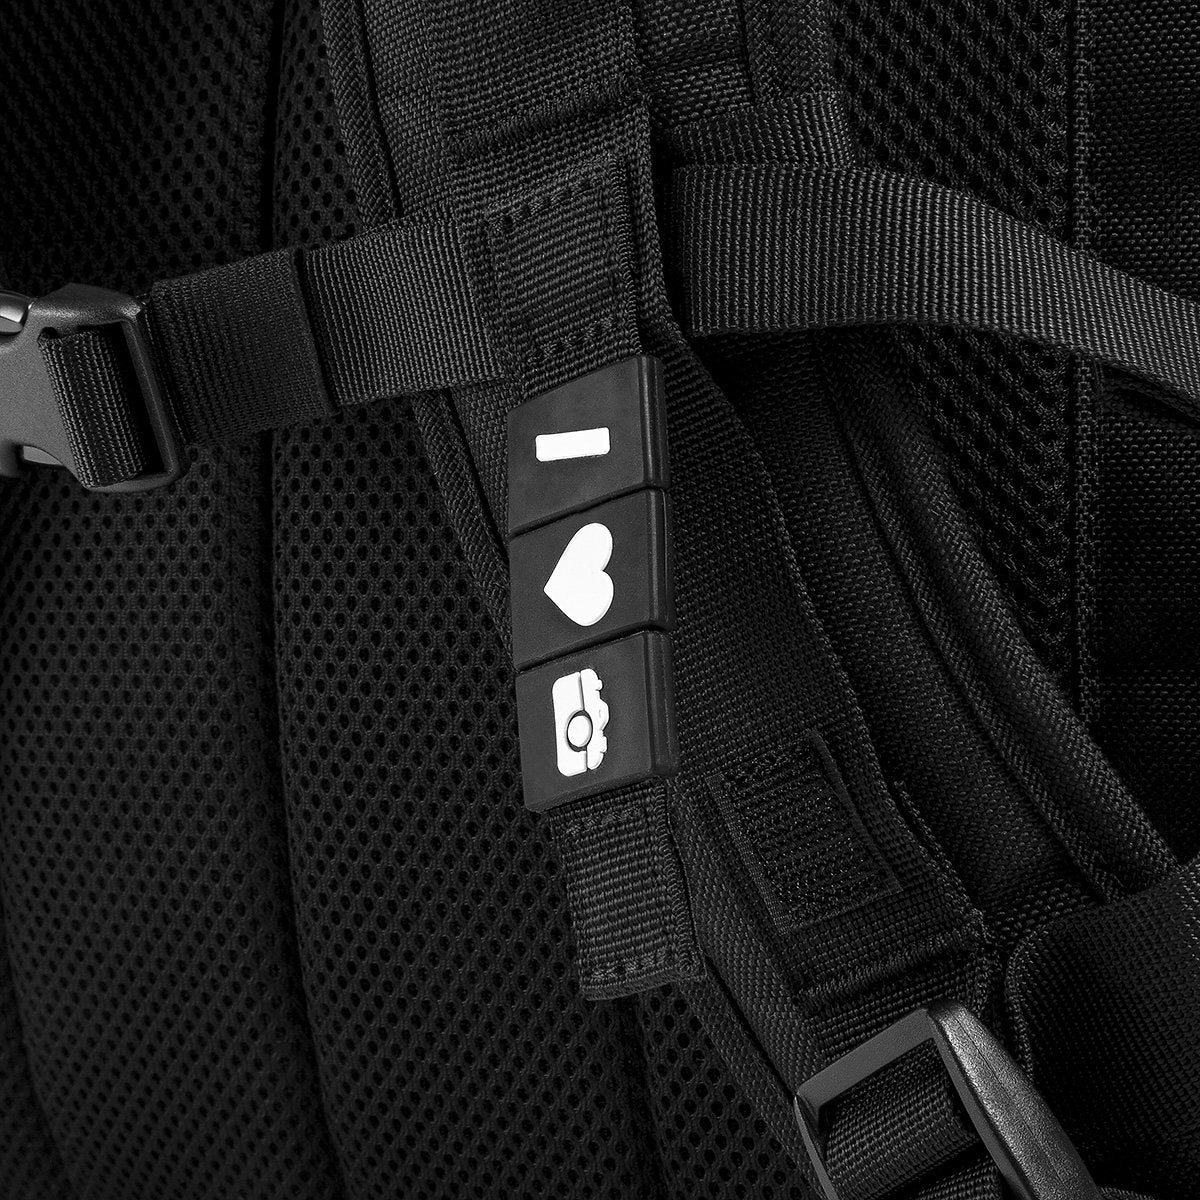 FrontRow Camera Half Backpack